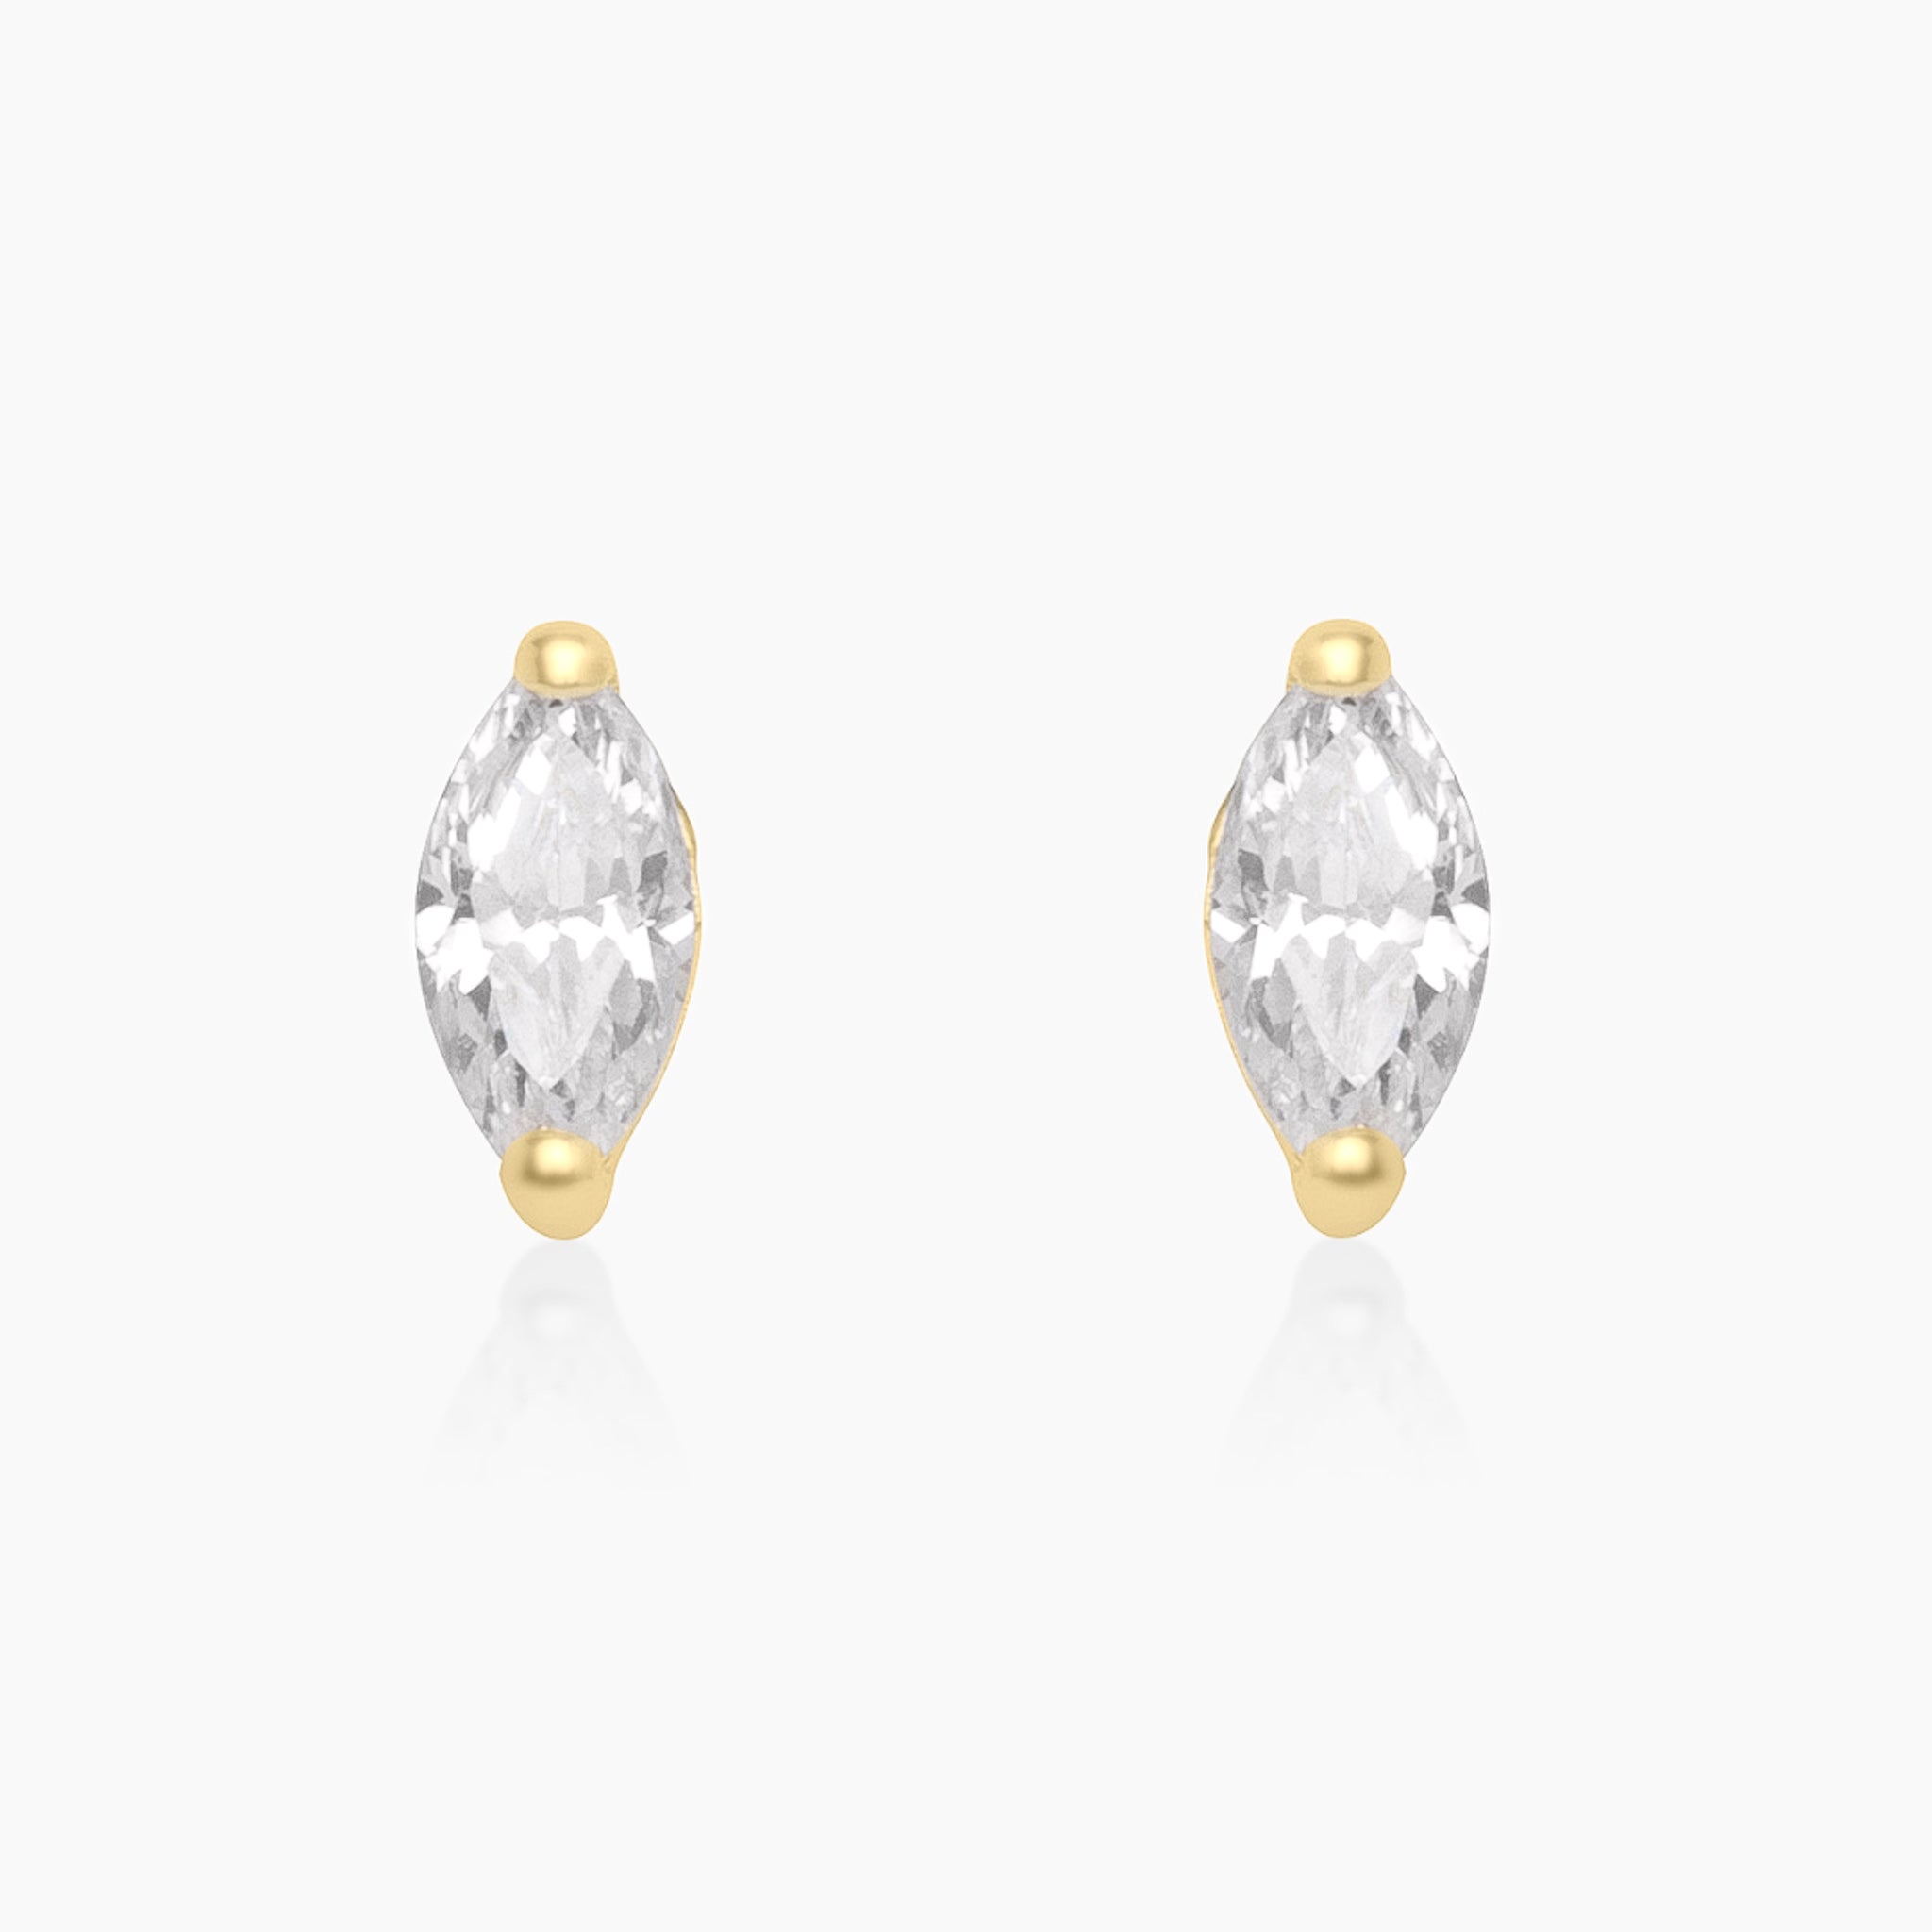 14K YELLOW GOLD MARQUISE CZ STUD EARRINGS